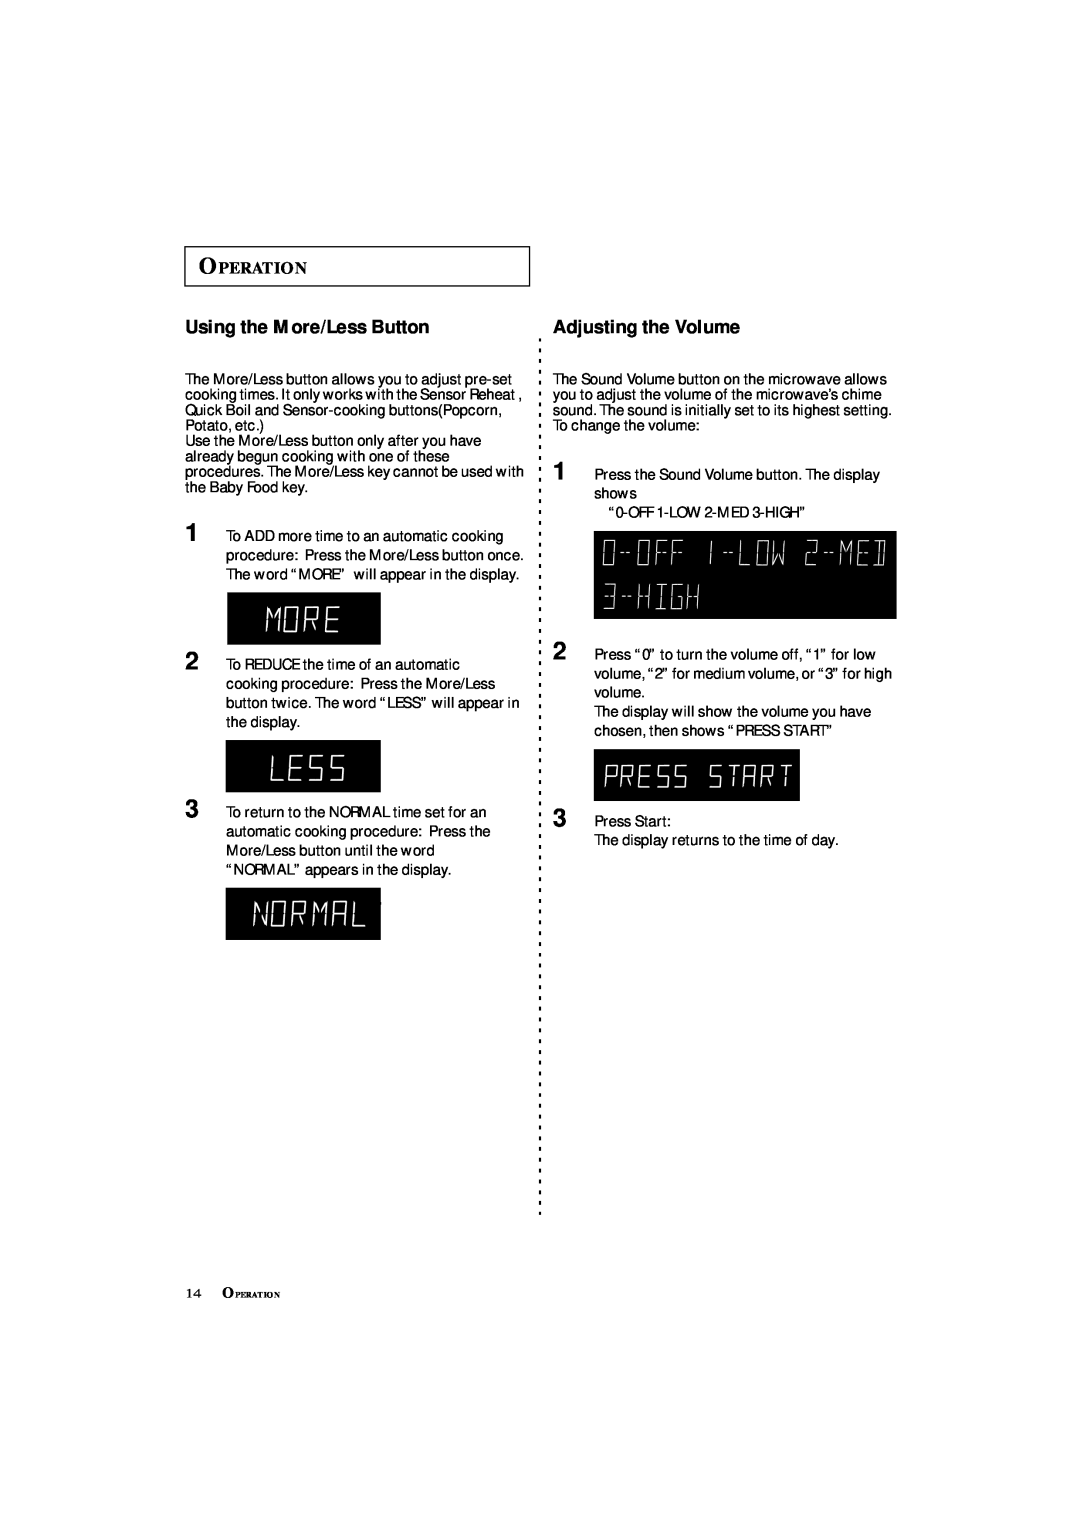 Samsung MS8899S manual Using the More/Less Button, Operation, Adjusting the Volume 